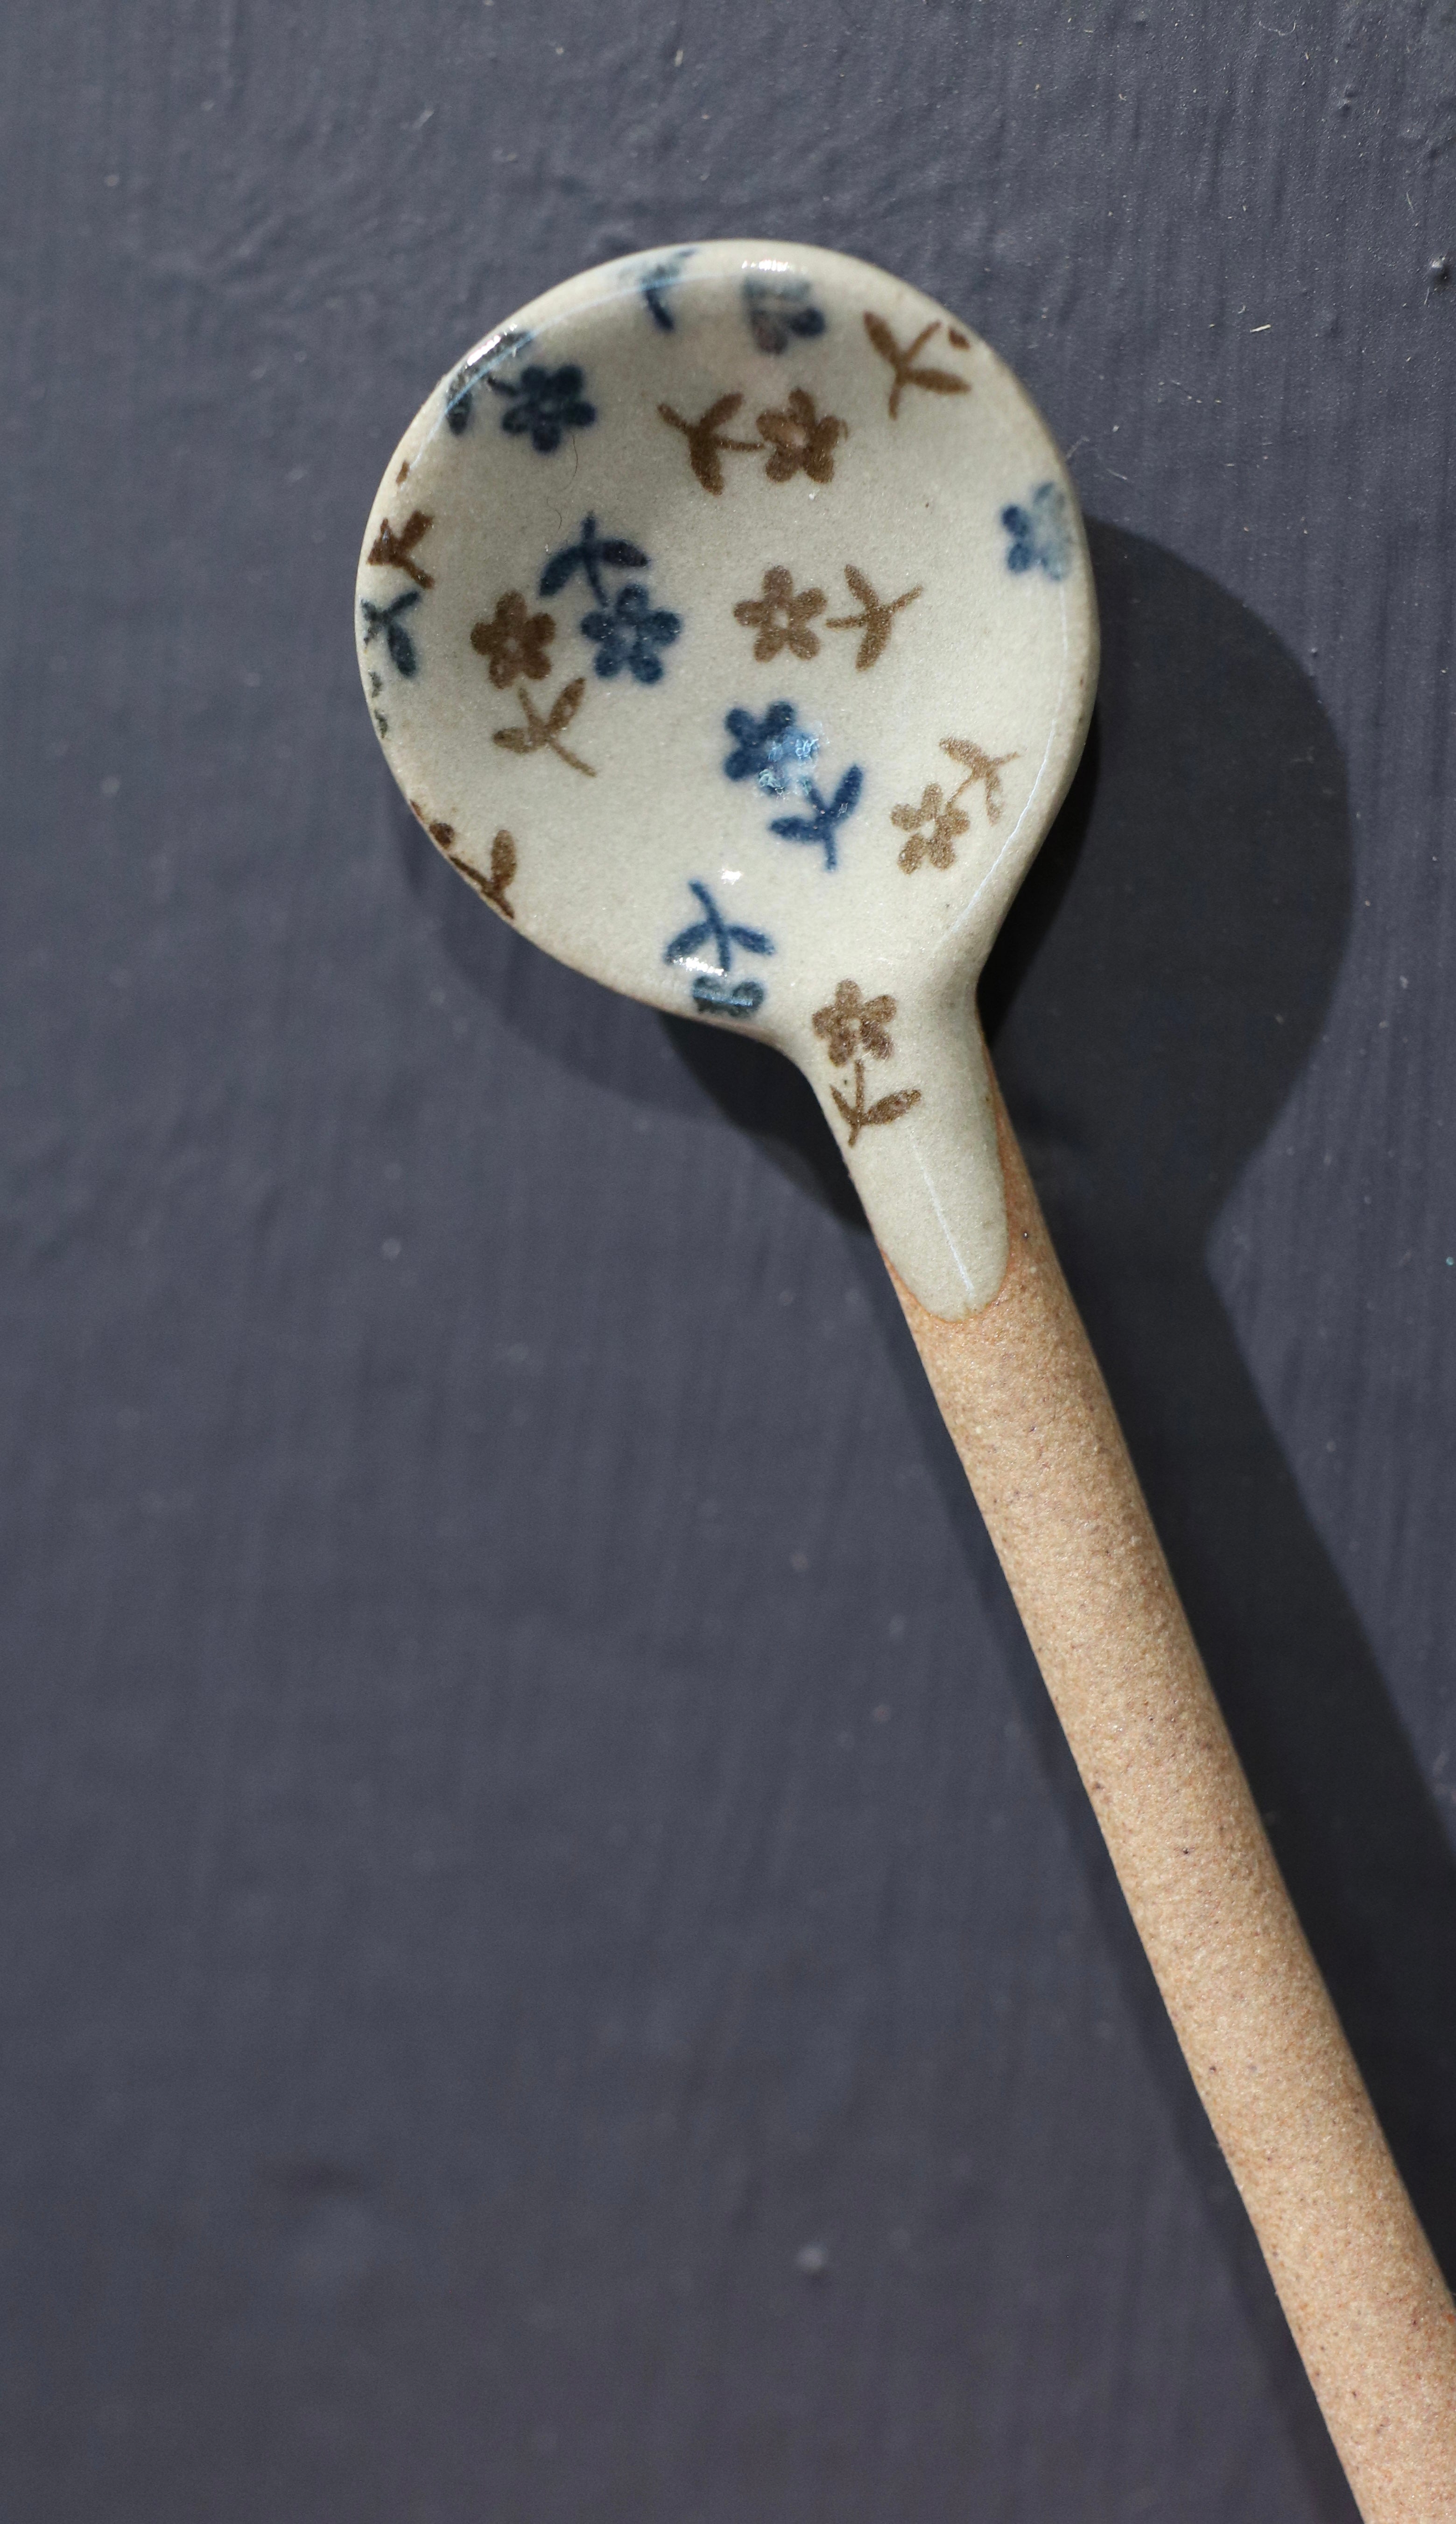 Ceramic spoon with small flowers